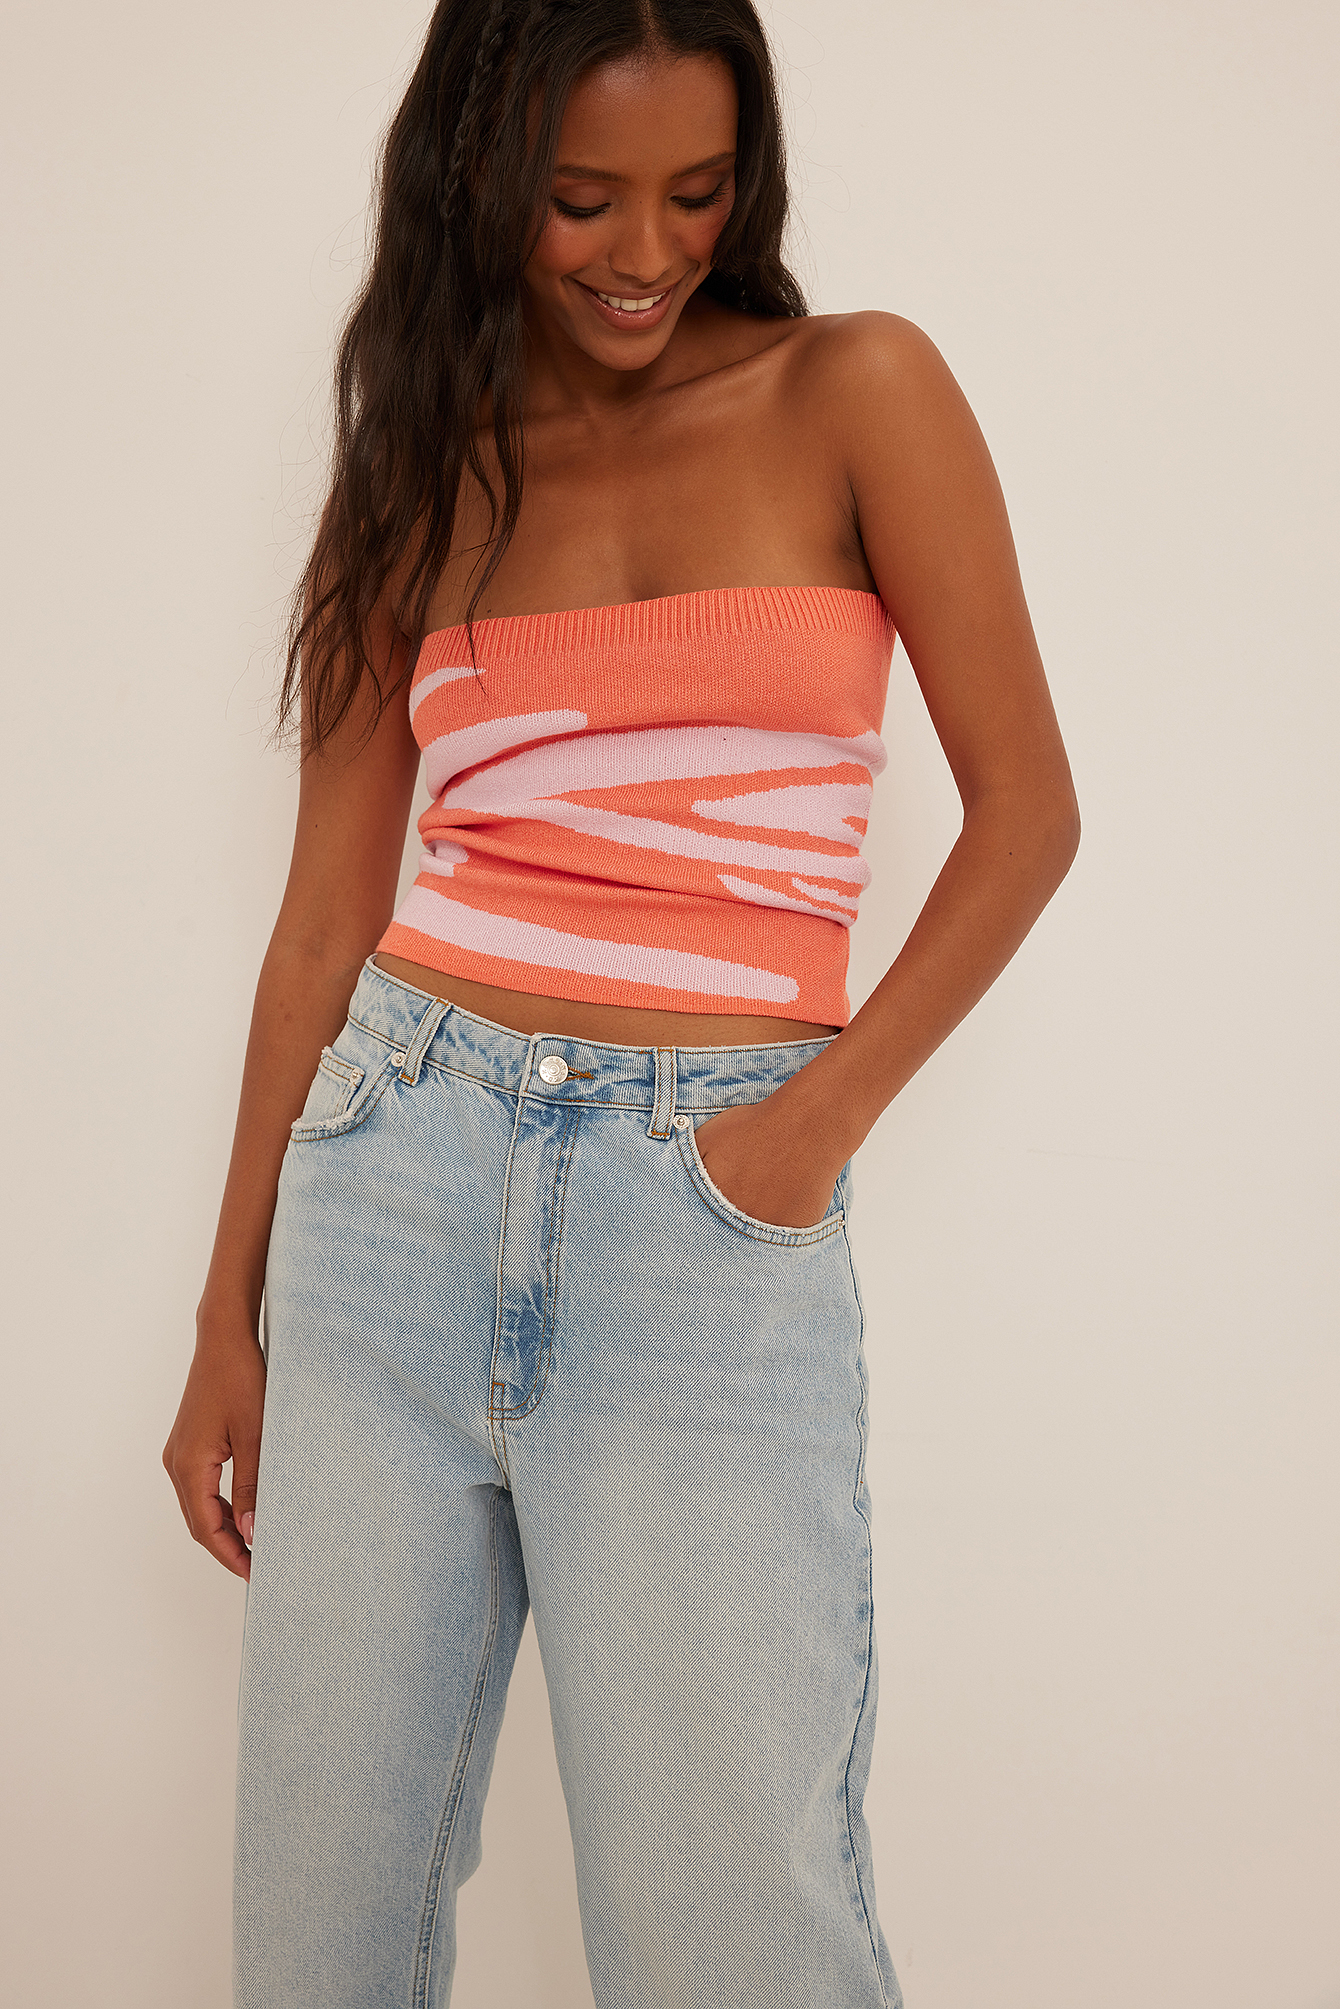 HM Bandeau top roze casual uitstraling Mode Tops Bandeau tops 